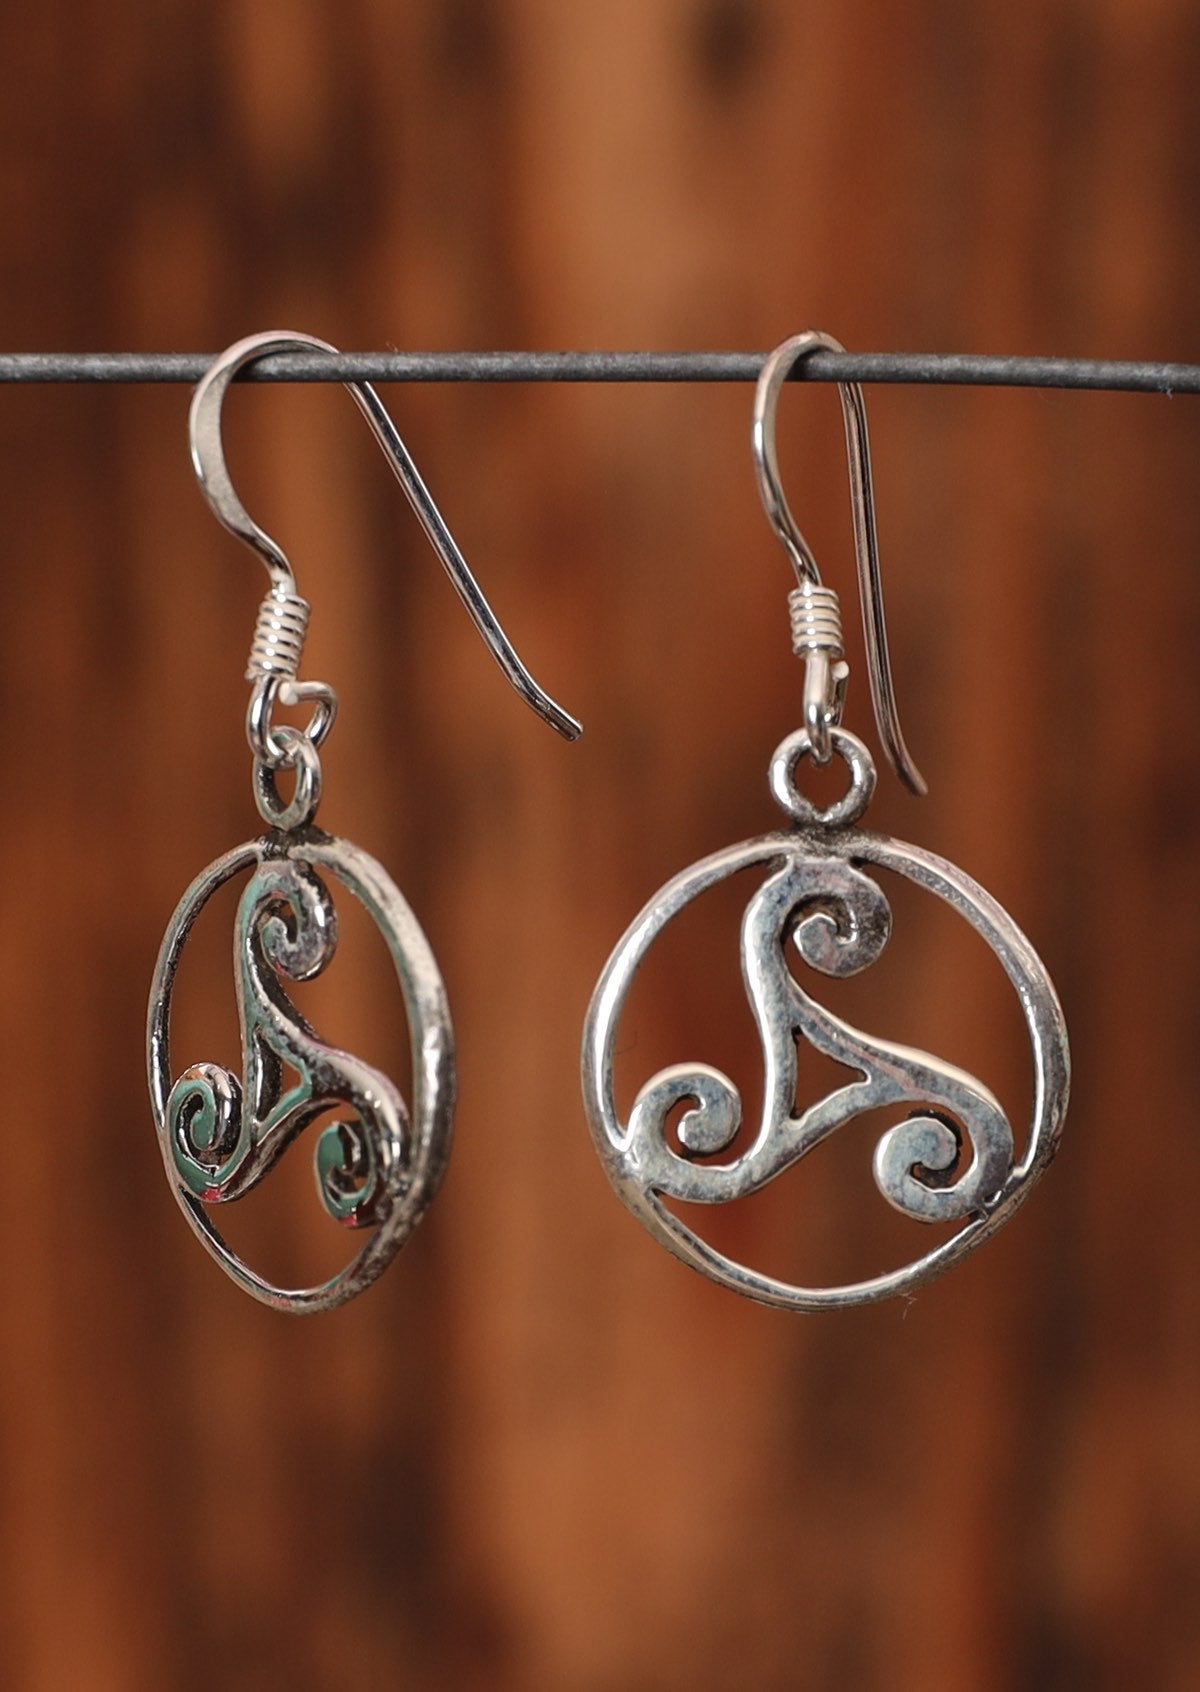 92.5% silver Triskele earrings in a circle hanging on a wire for display.